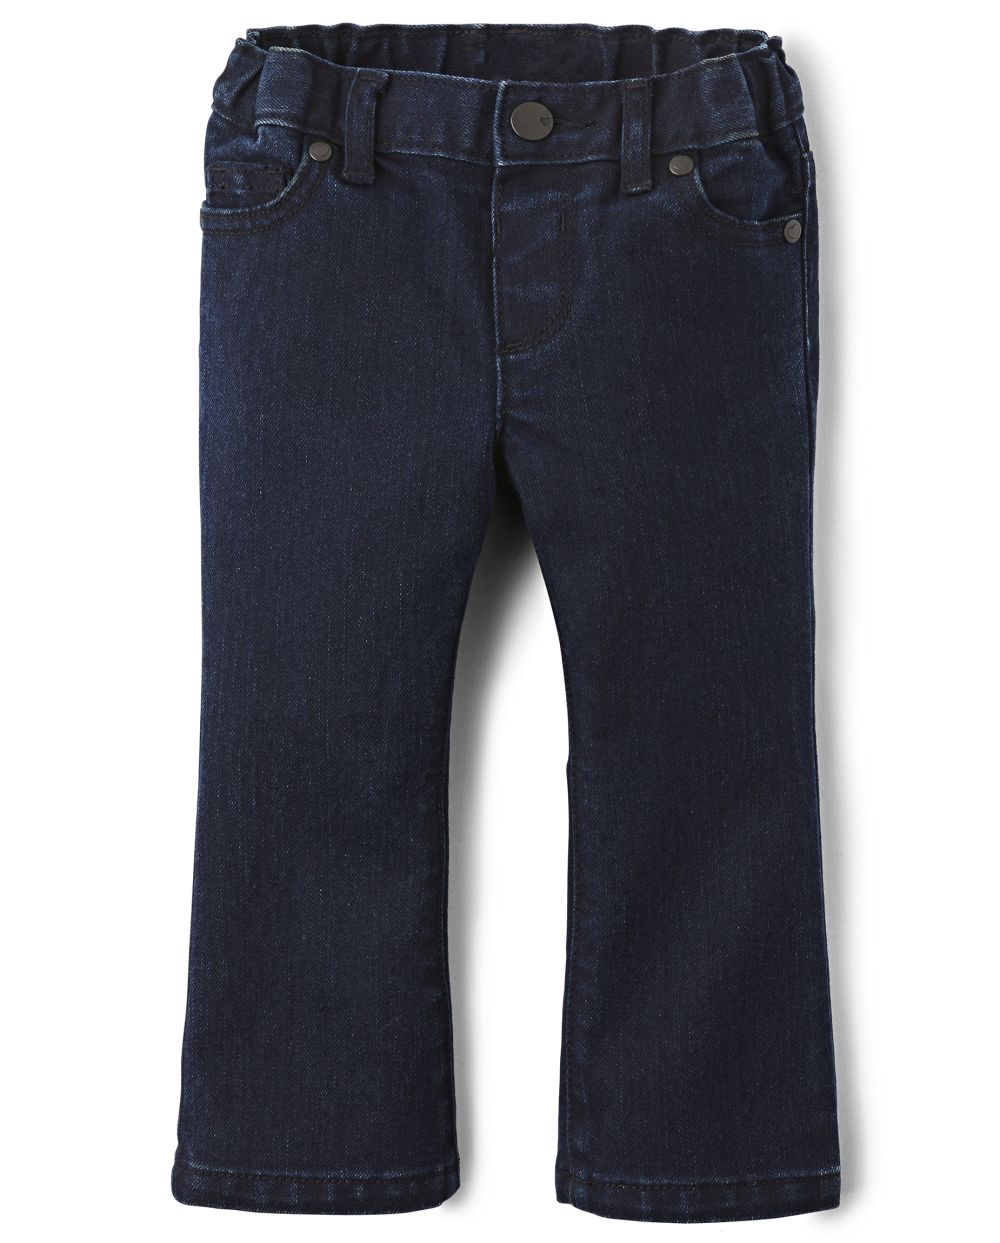 Baby And Toddler Girls Basic Bootcut Jeans - Blueberry Wash